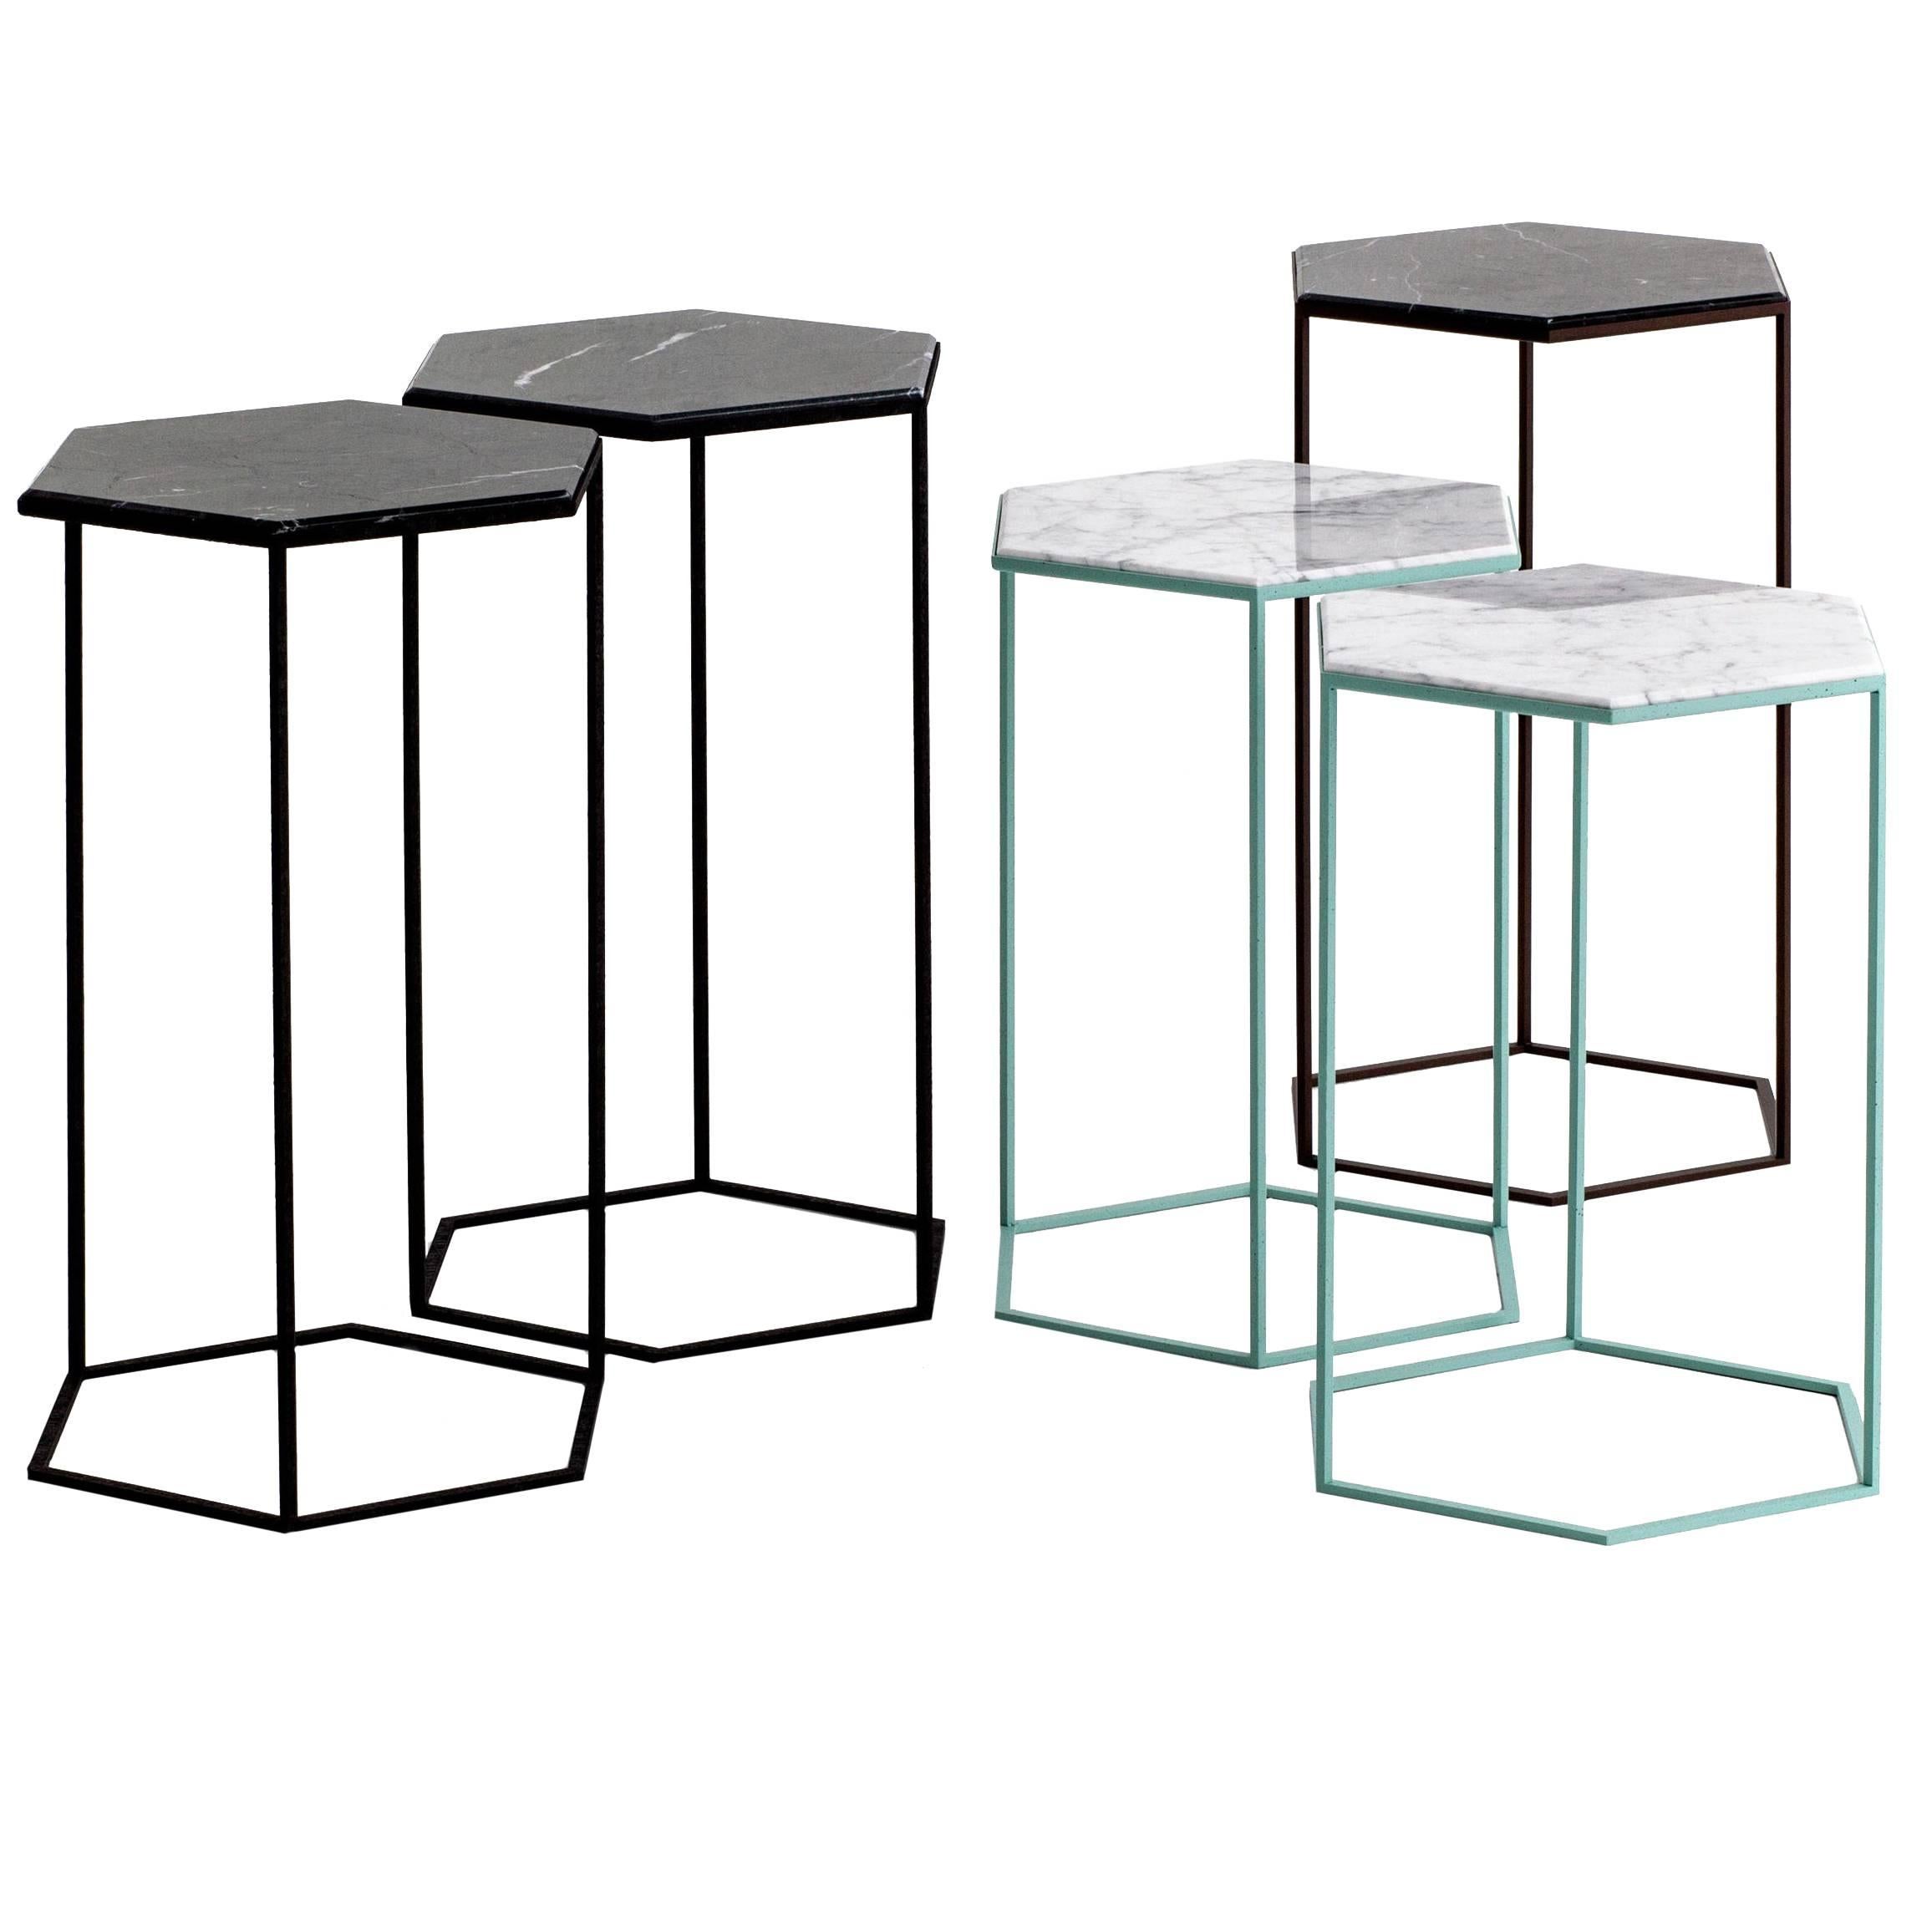 Moroso Hexxed Side Table in Color Varnished Steel and Marble For Sale